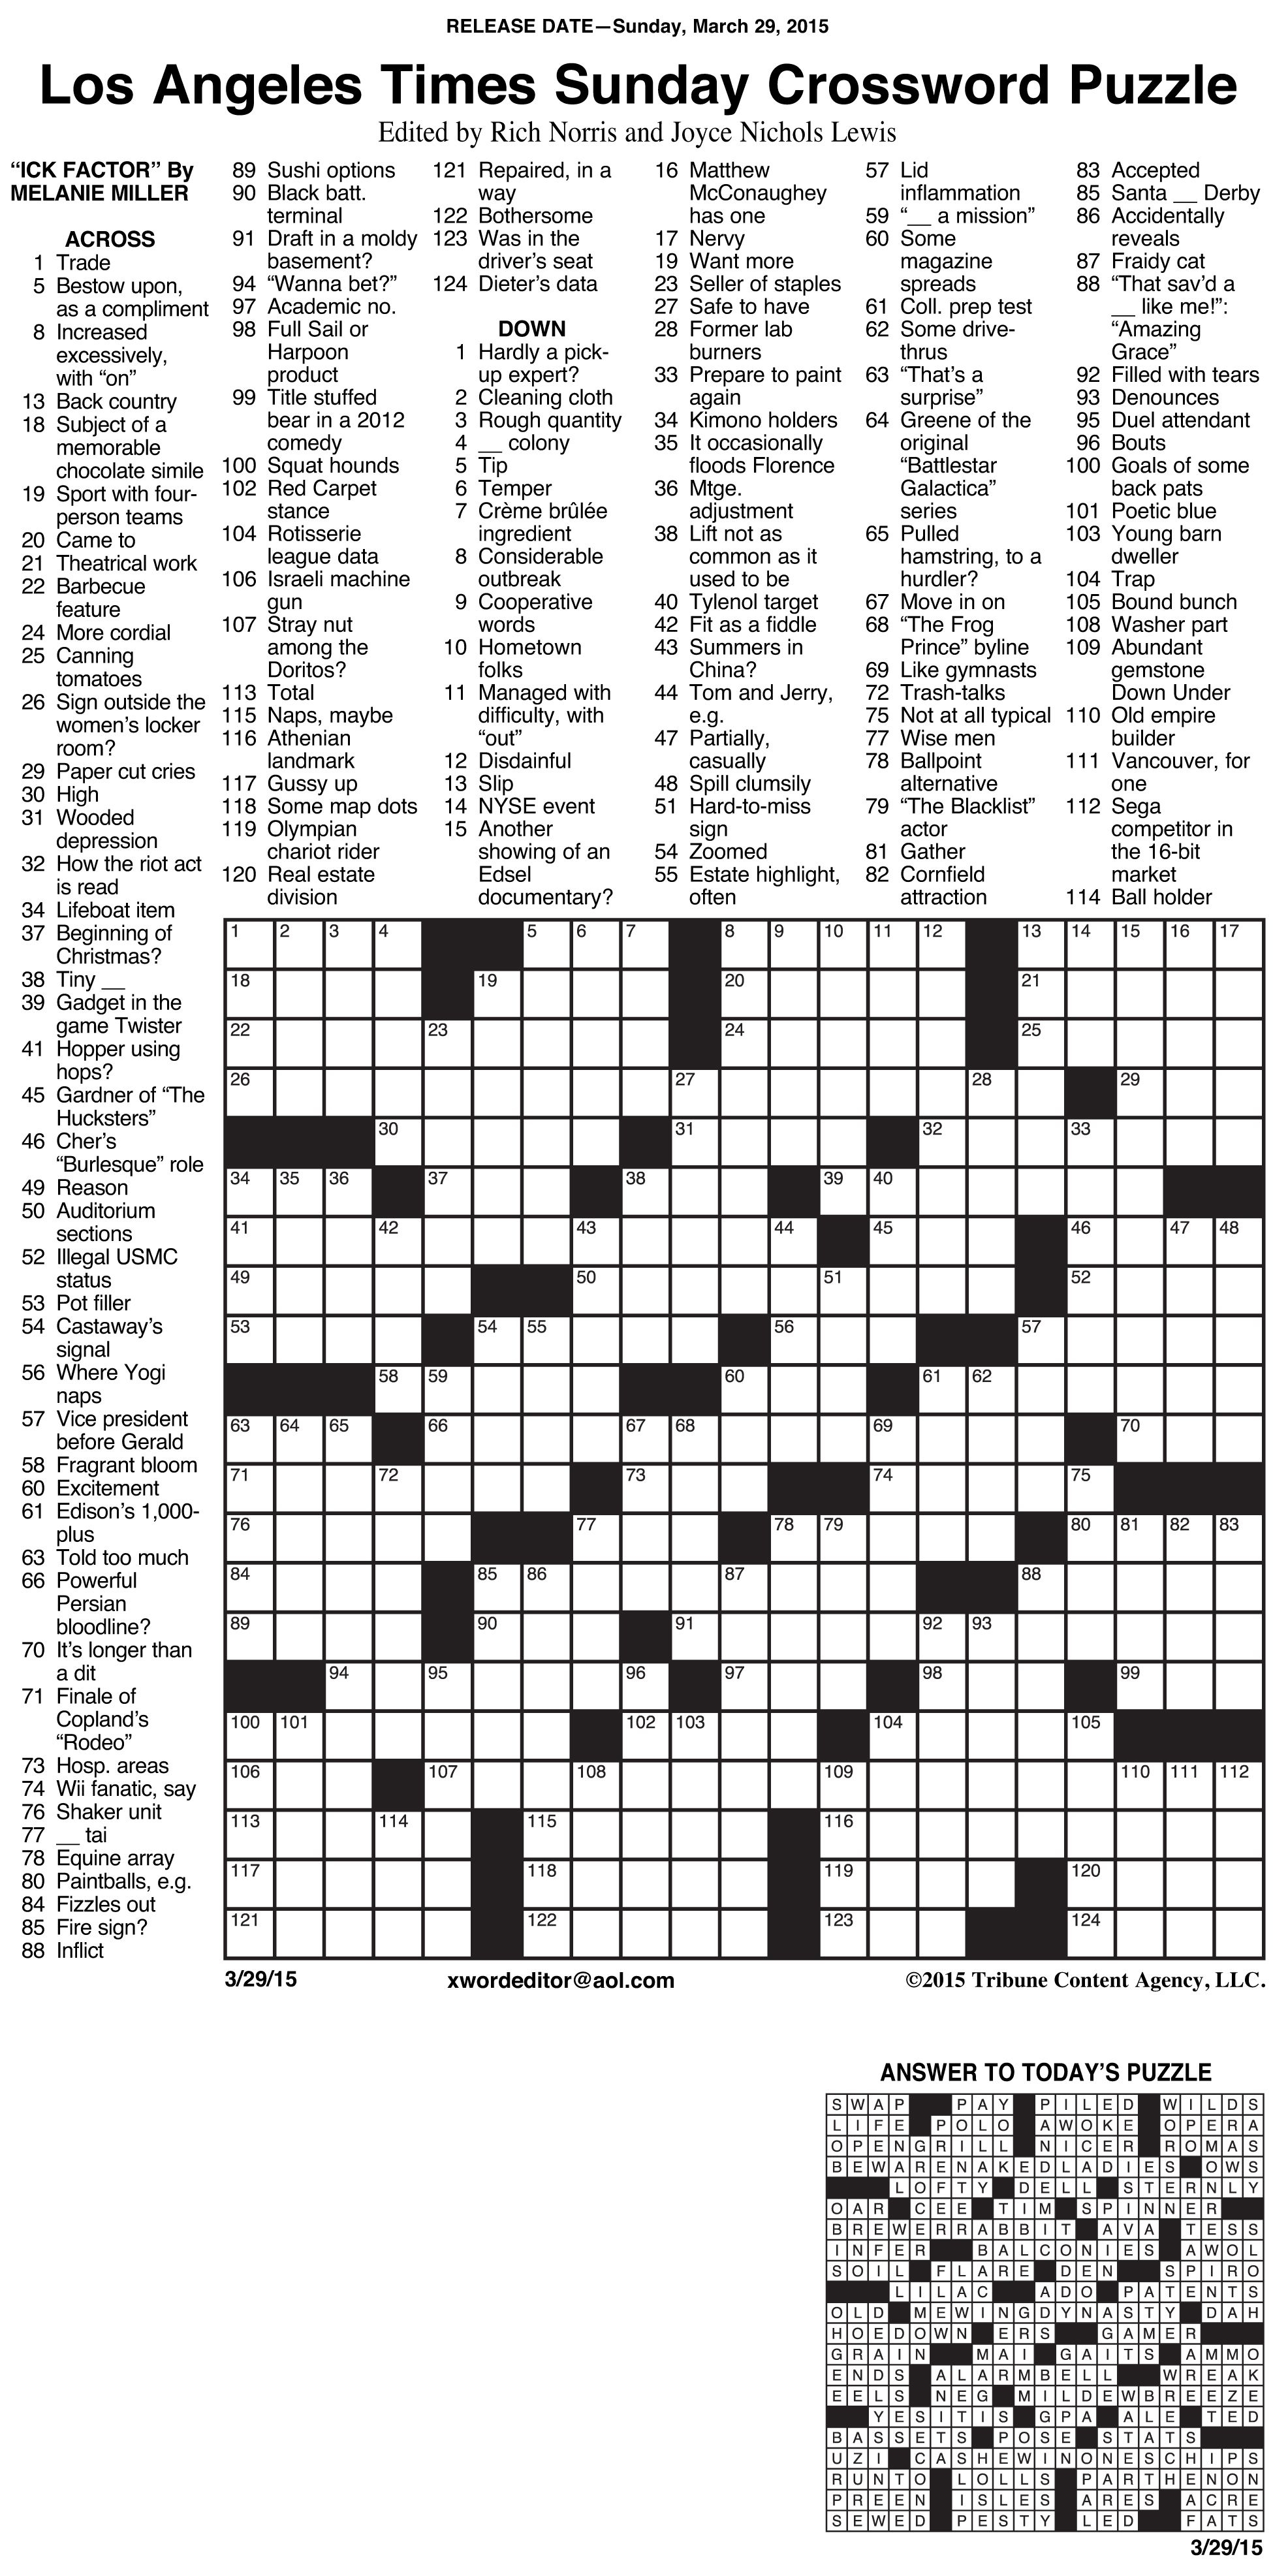 Images: Nyt Free Printable Crossword Puzzles, - Best Games Resource - Printable Crossword Puzzle La Times